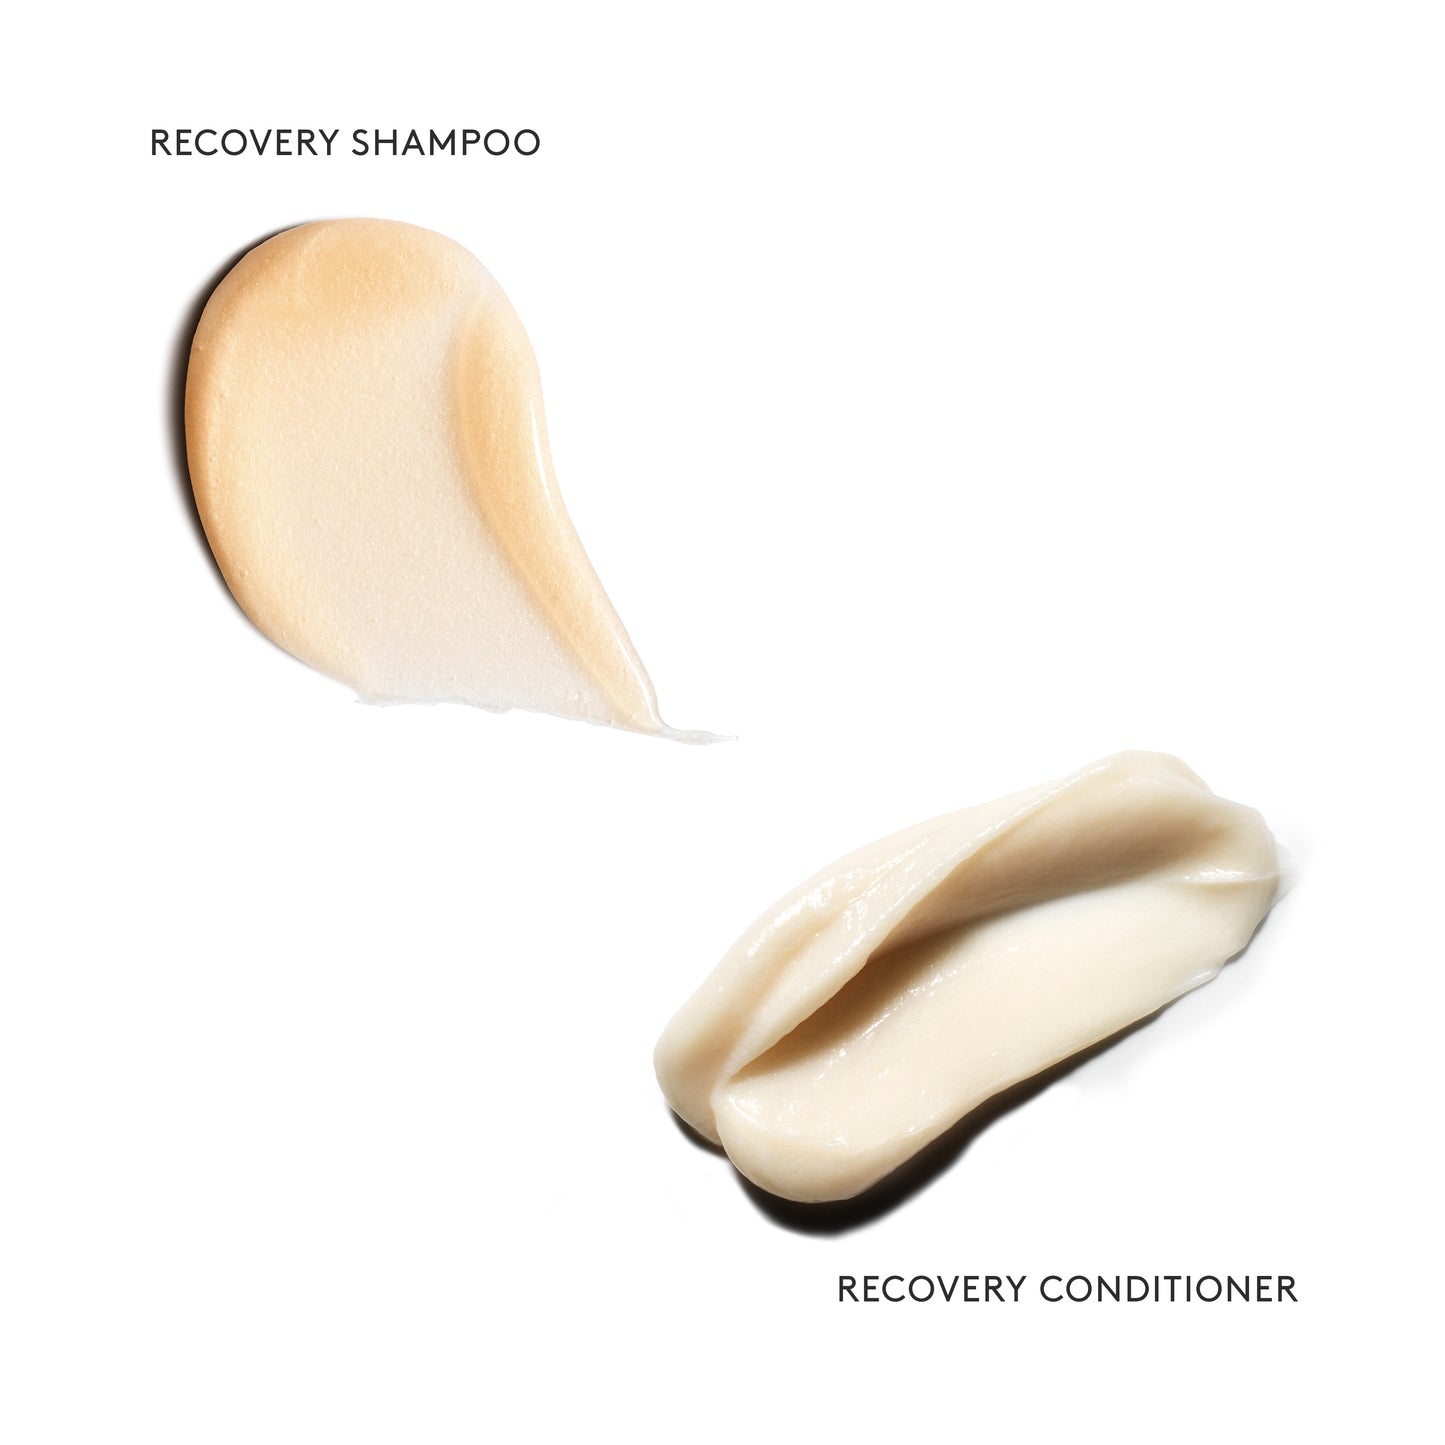 RECOVERY CONDITIONER Hydrates | Softens | Renews